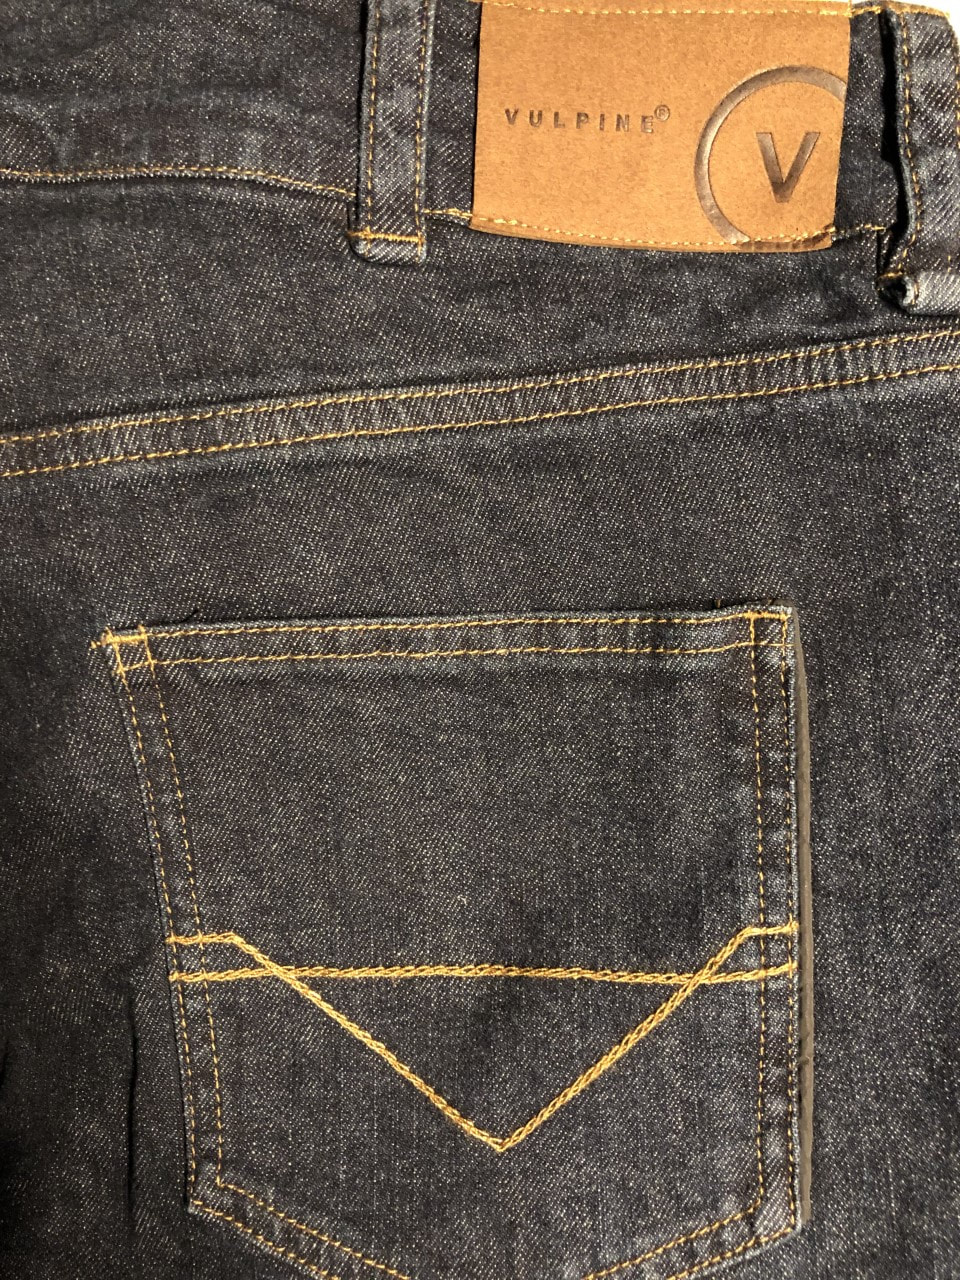 The rear pocket of the Vulpine cycling jean. It has the Vulpine logo where the belt hoops are and the pocket has a V shaped stitching